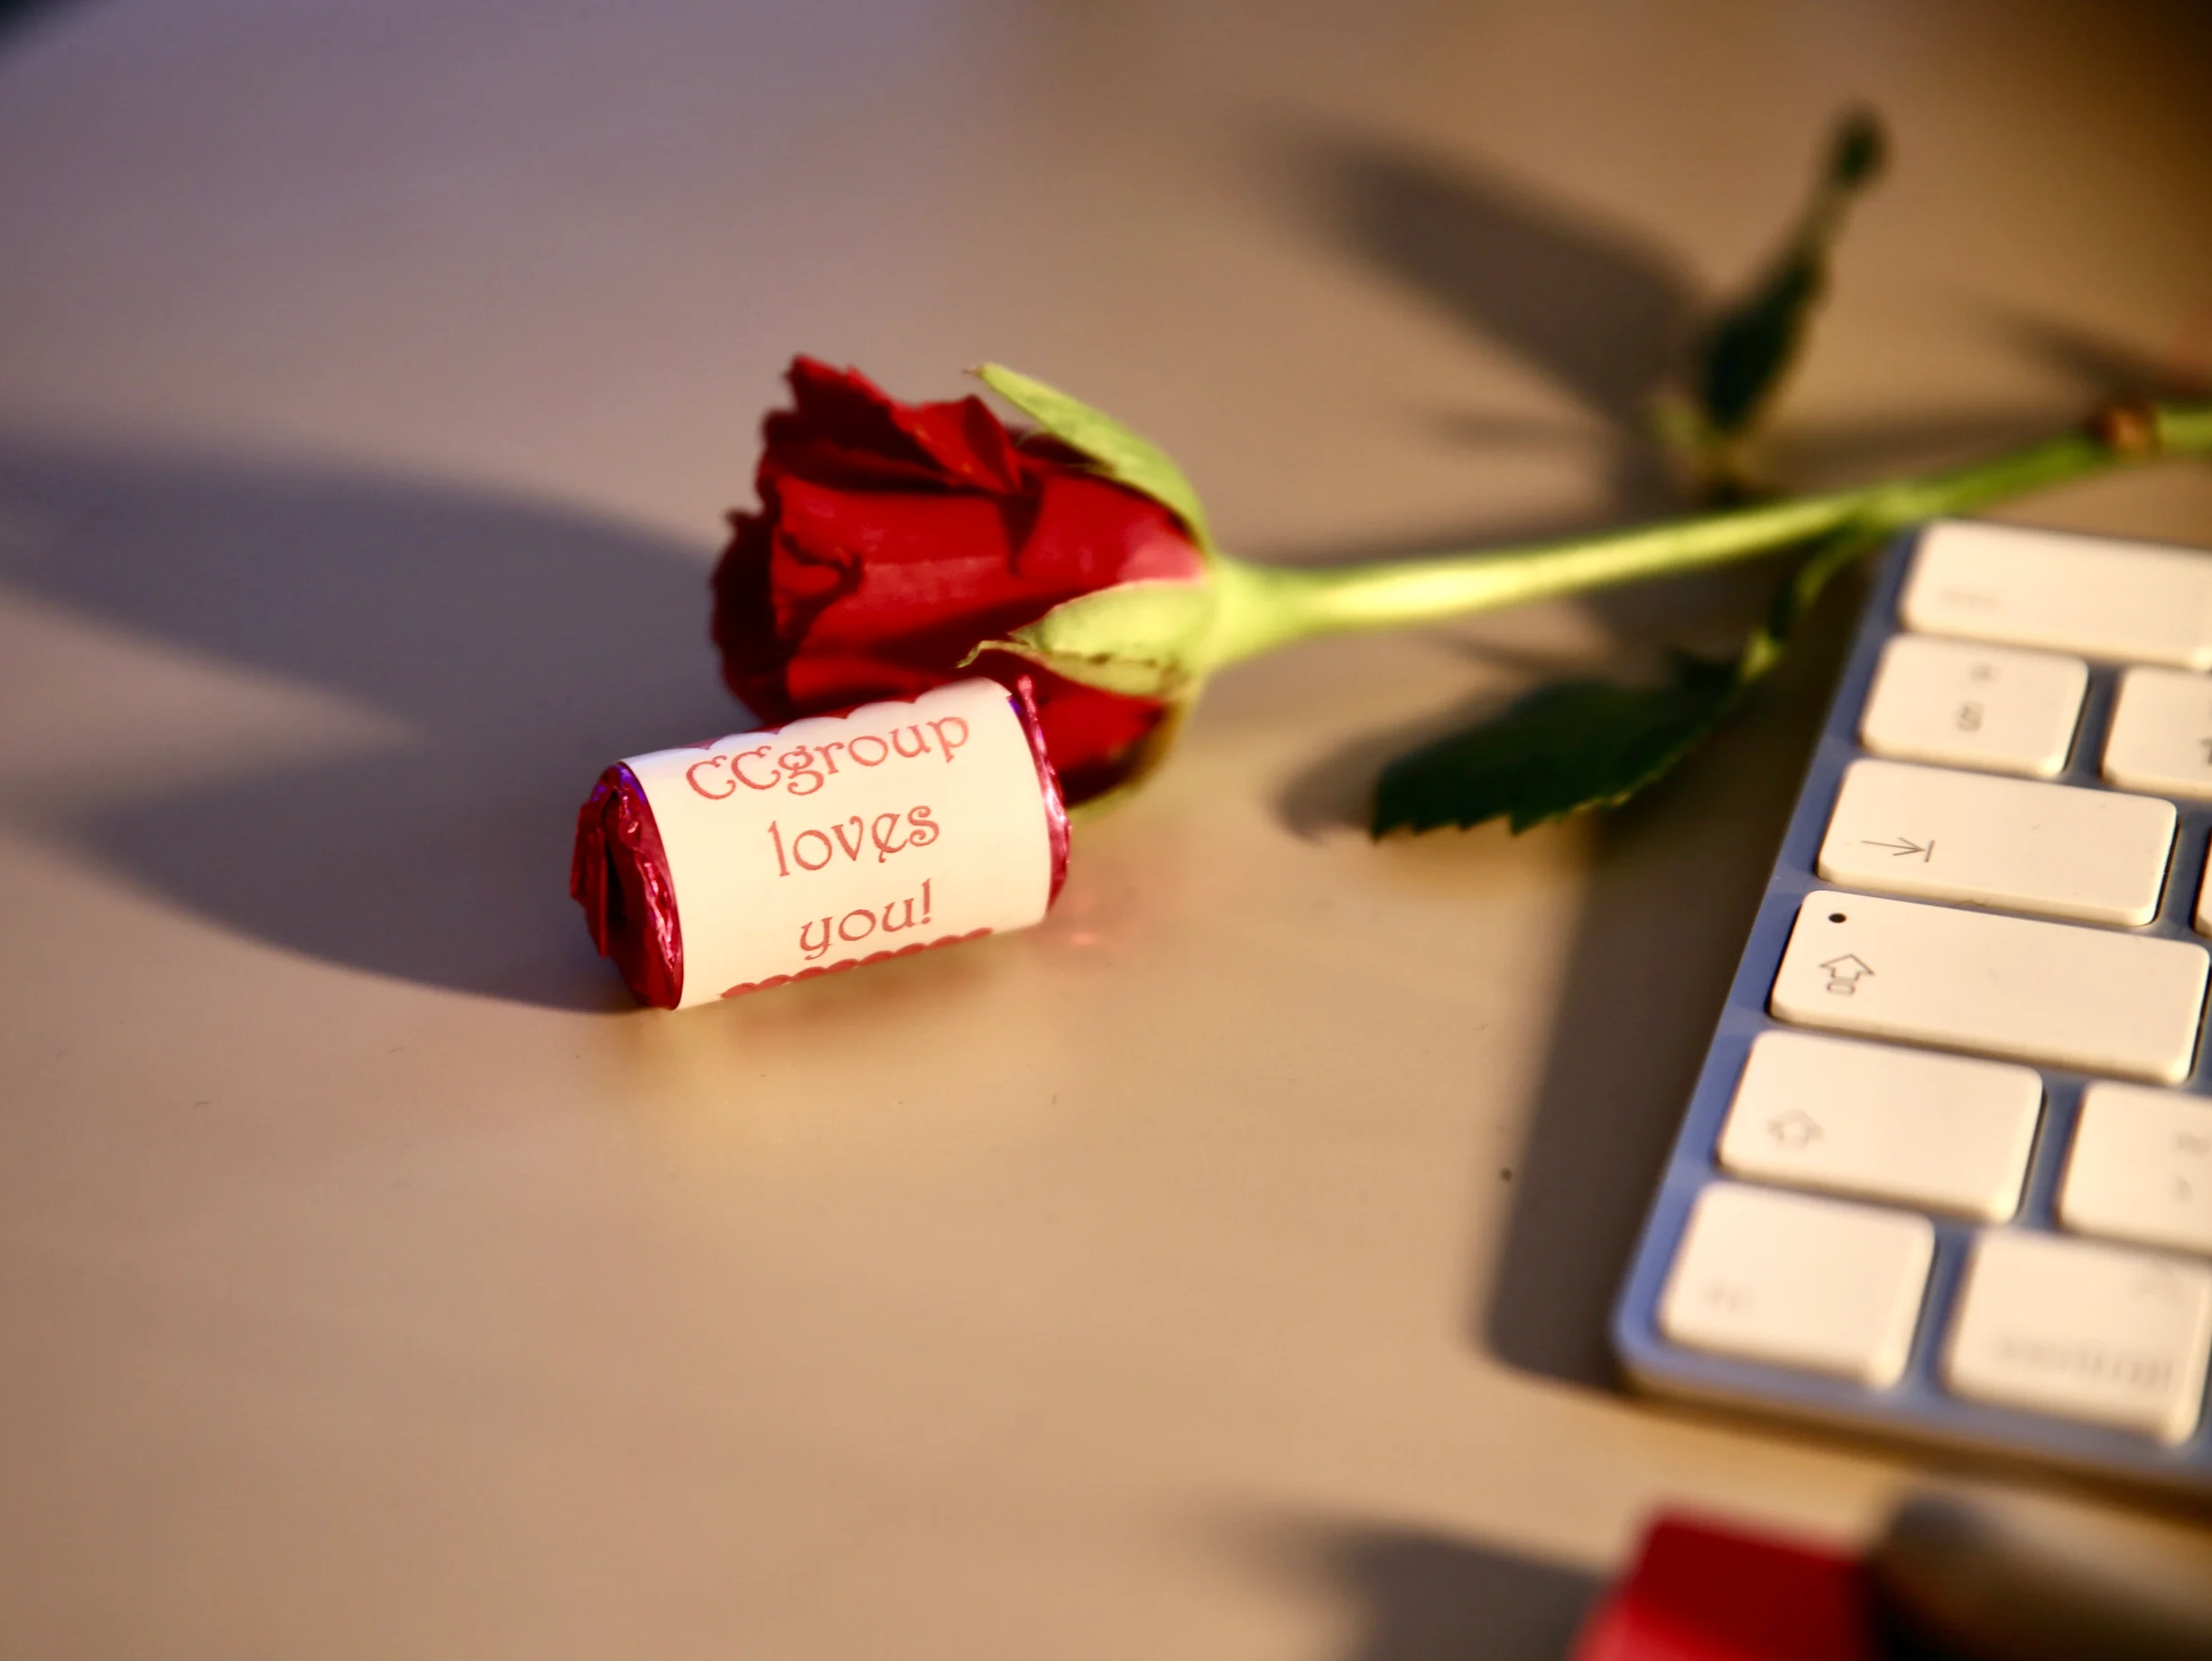 Why CCGroupies received a rose on Valentine’s Day?